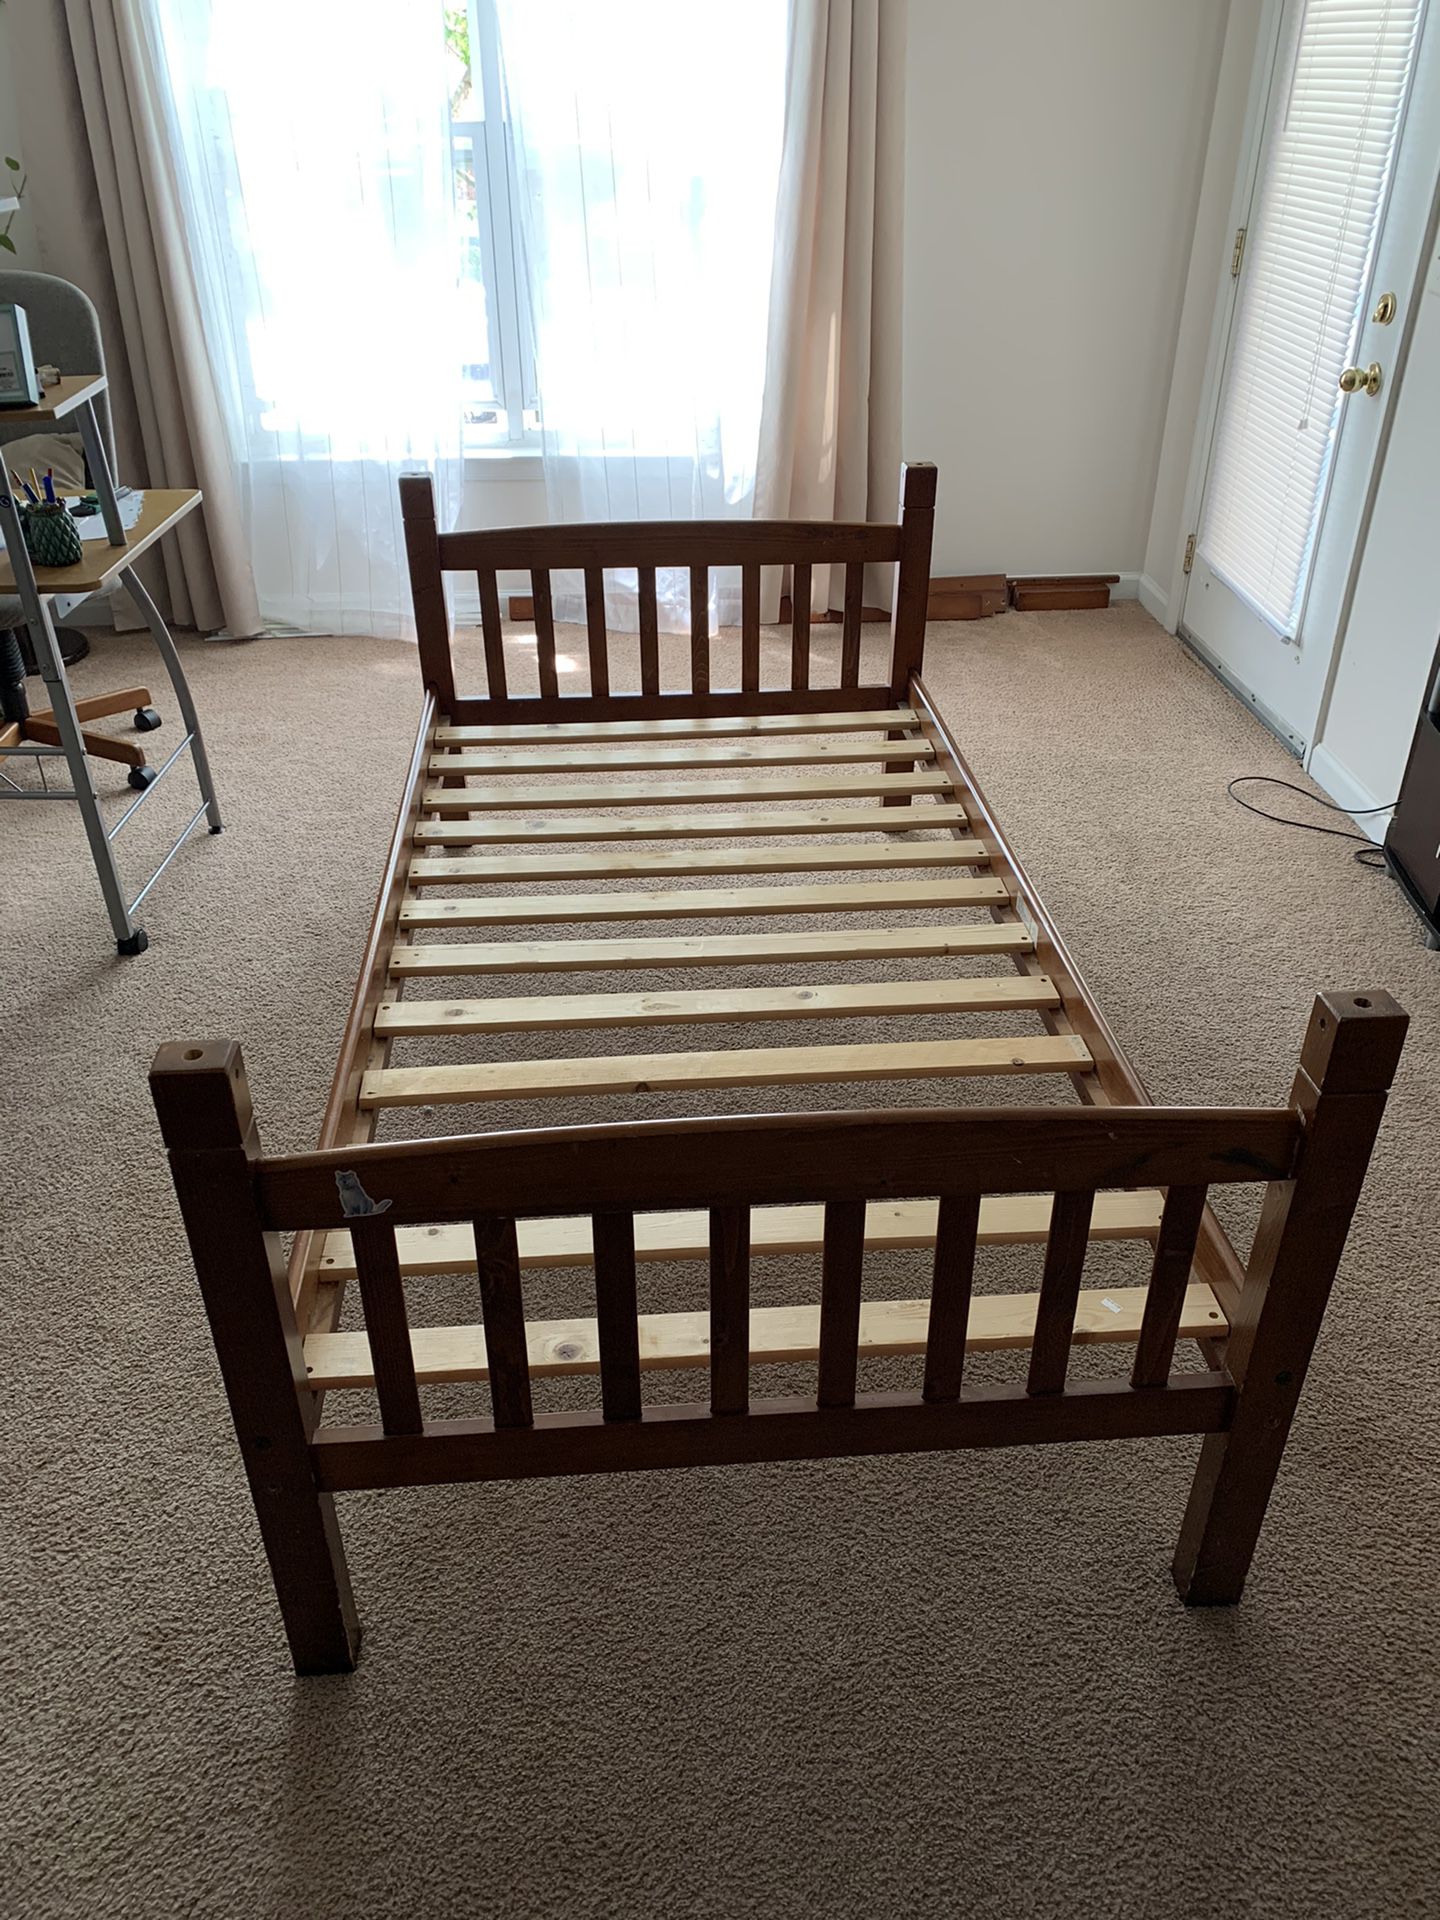 Twin bed frame.